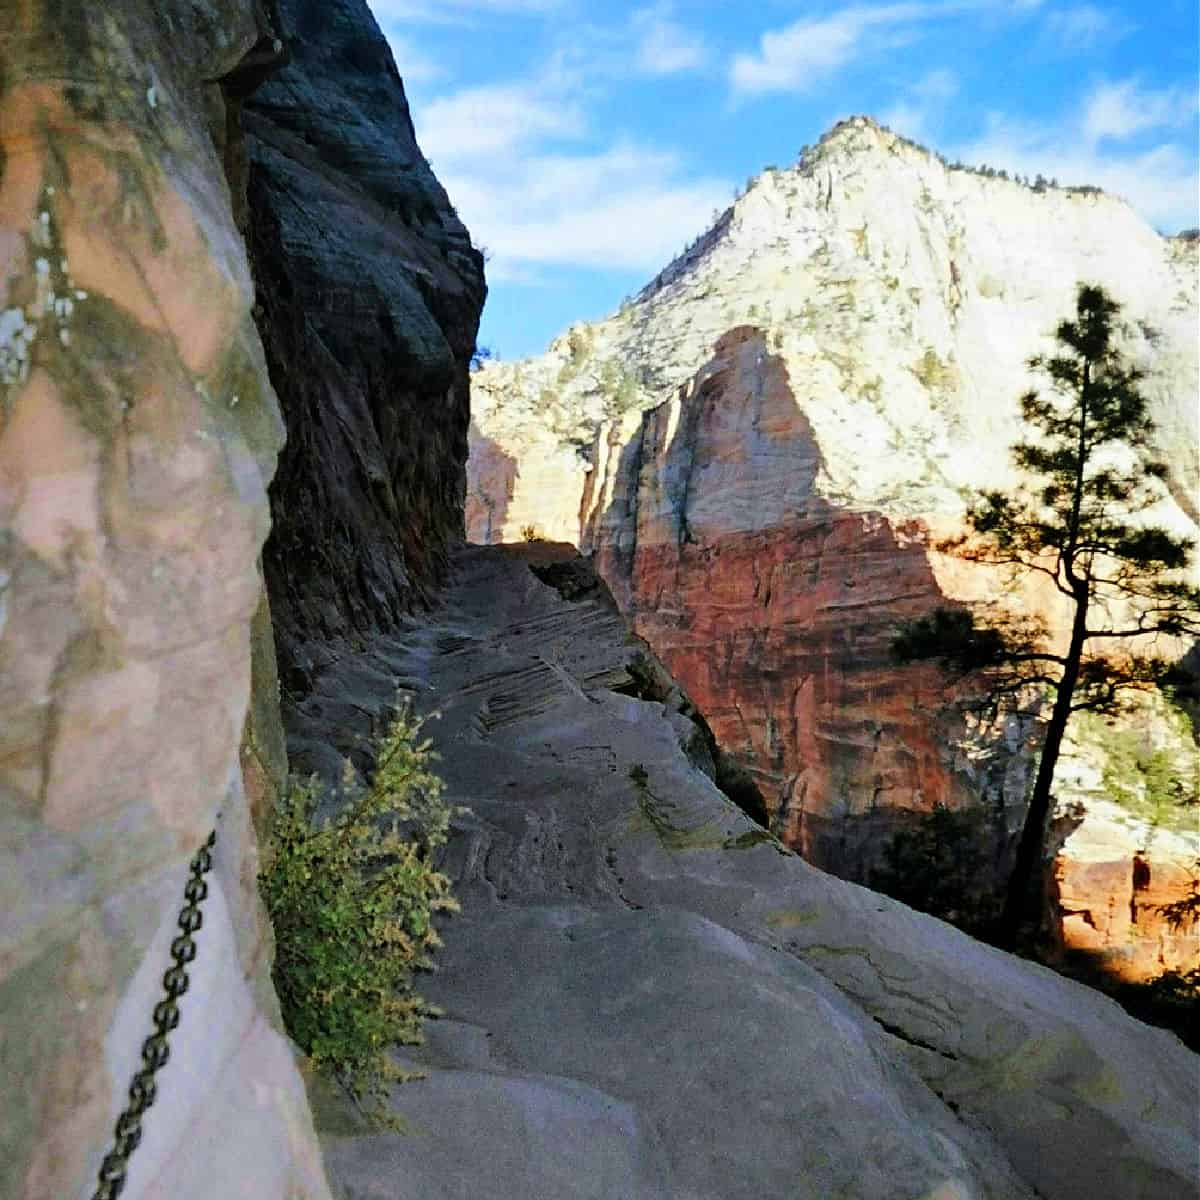 Hidden Canyon is one of my all time favorite hikes in Zion National Park and is a great add on when hiking from Weeping Rock through Echo Canyon up to Observation Point. Hopefully the rock slide will be cleared so park visitors can access this trail again in the future